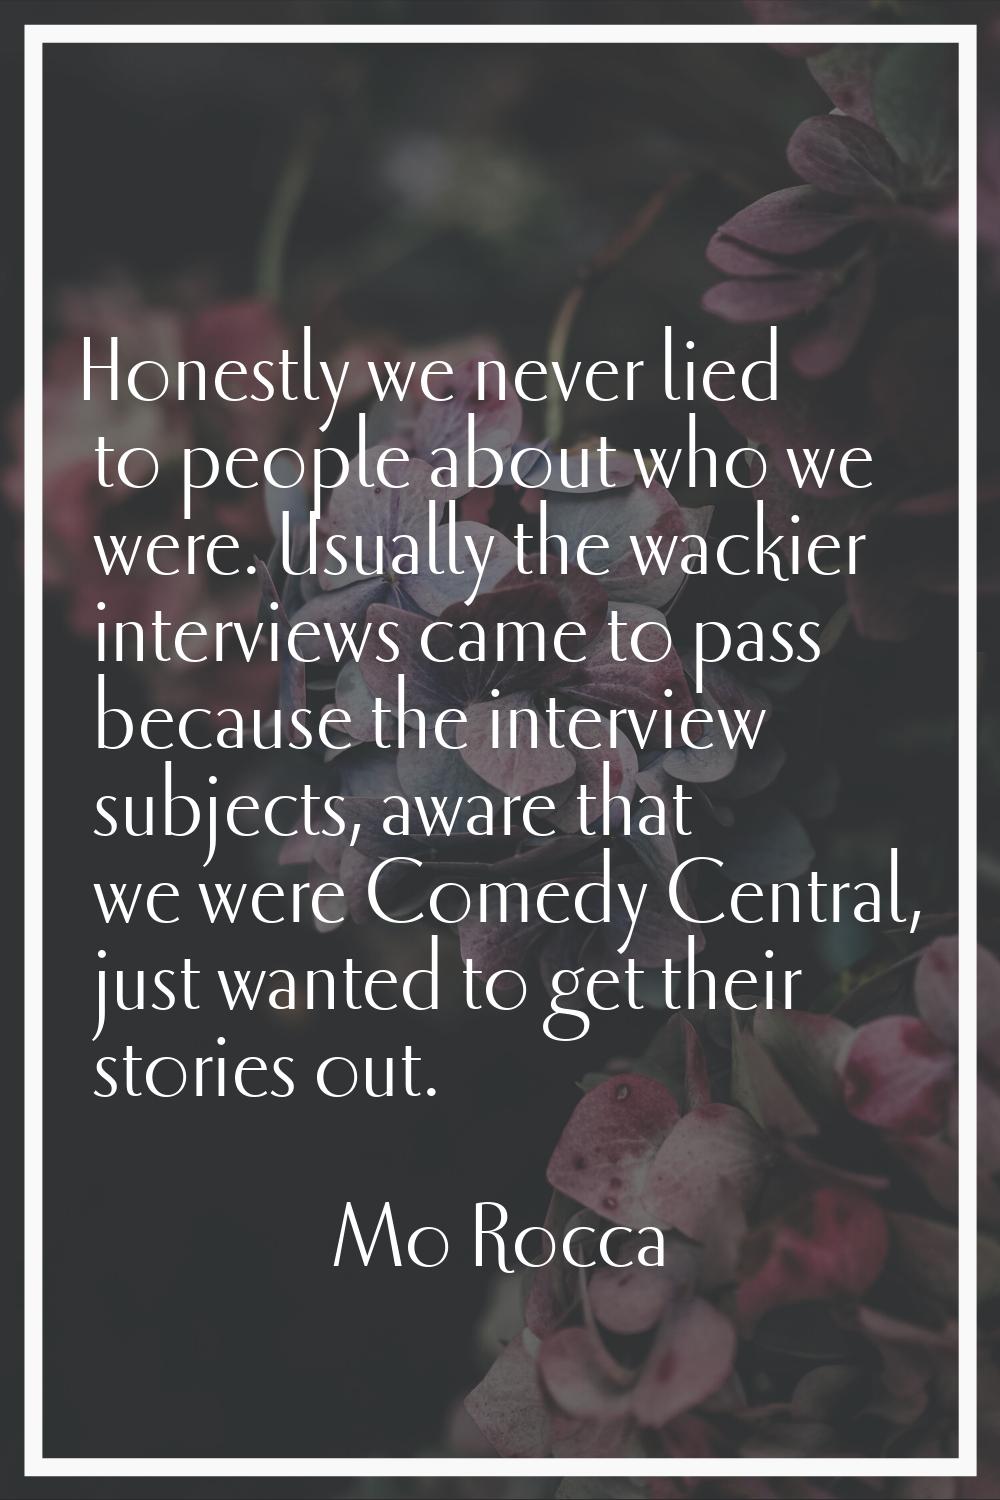 Honestly we never lied to people about who we were. Usually the wackier interviews came to pass bec